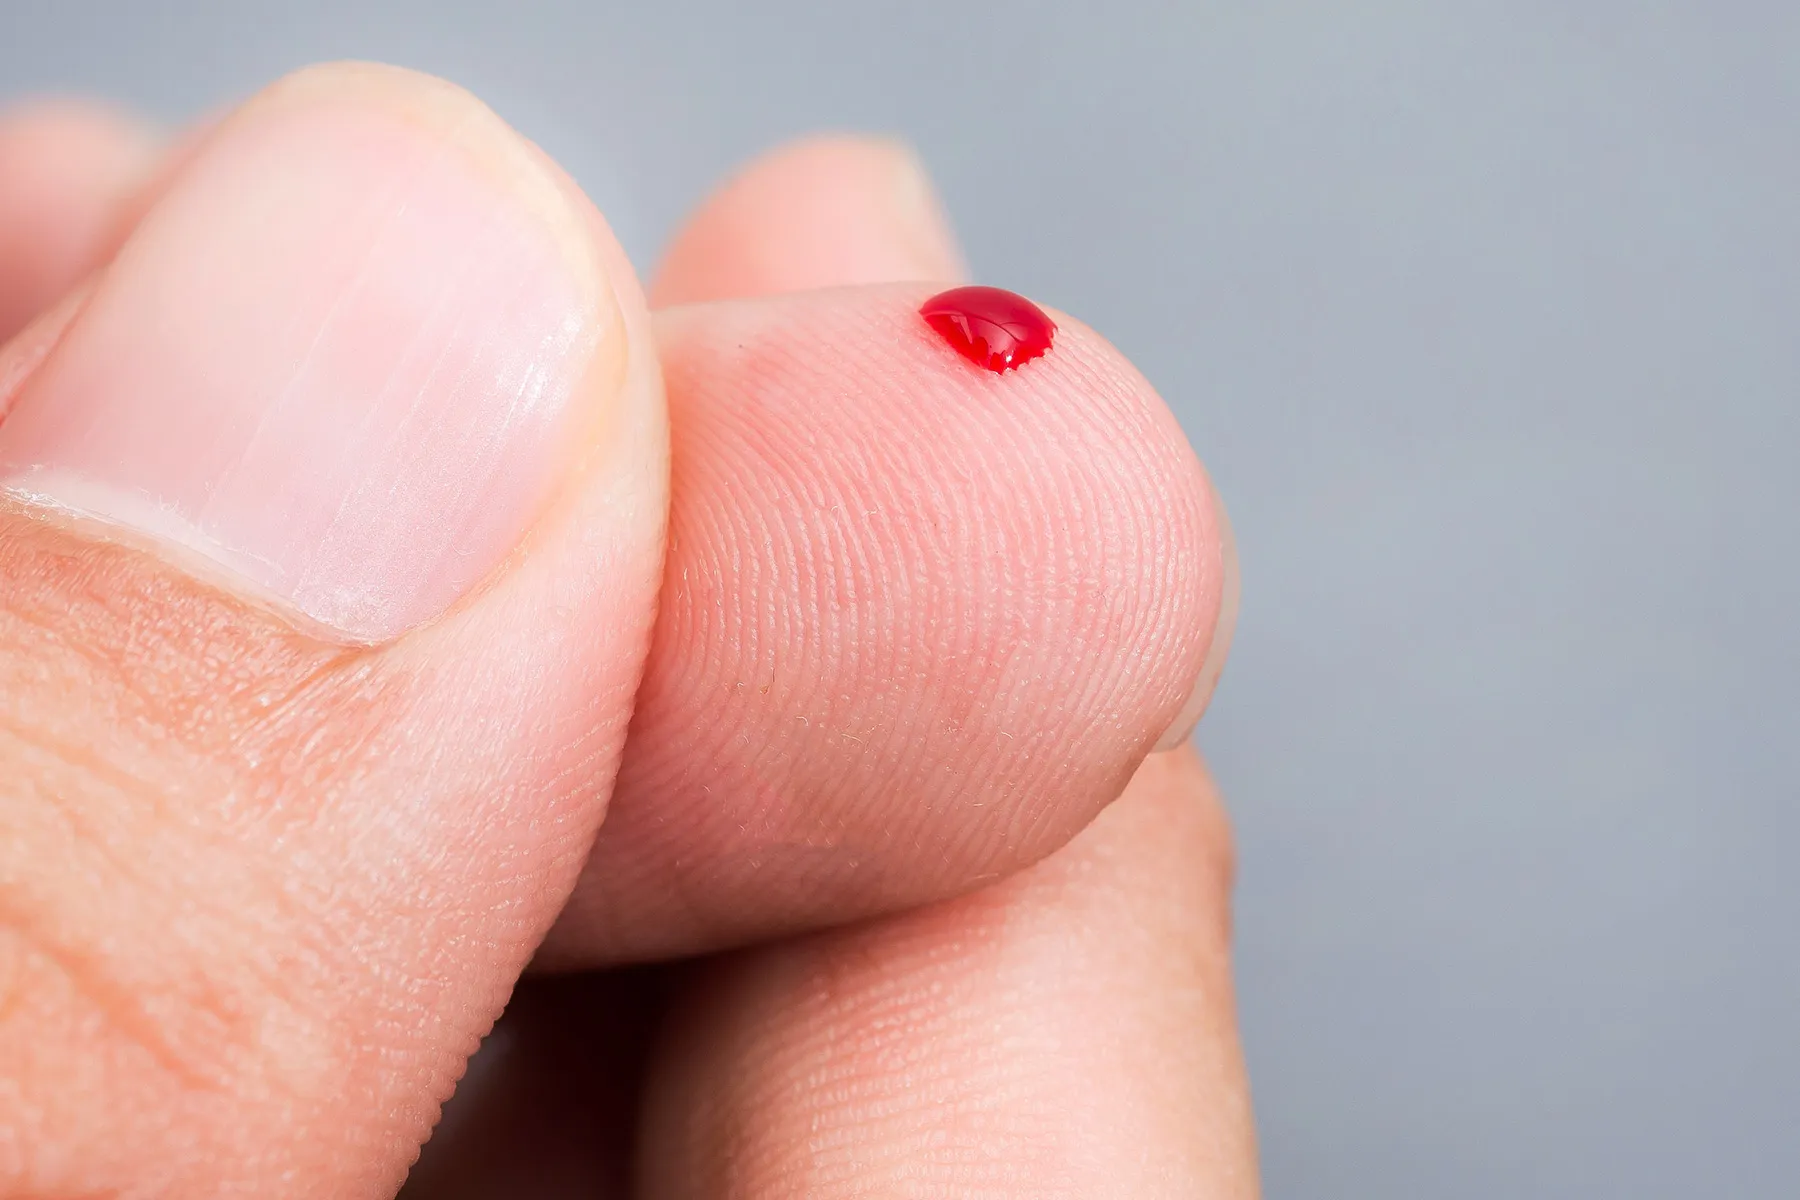 photo of blood drop on finger,